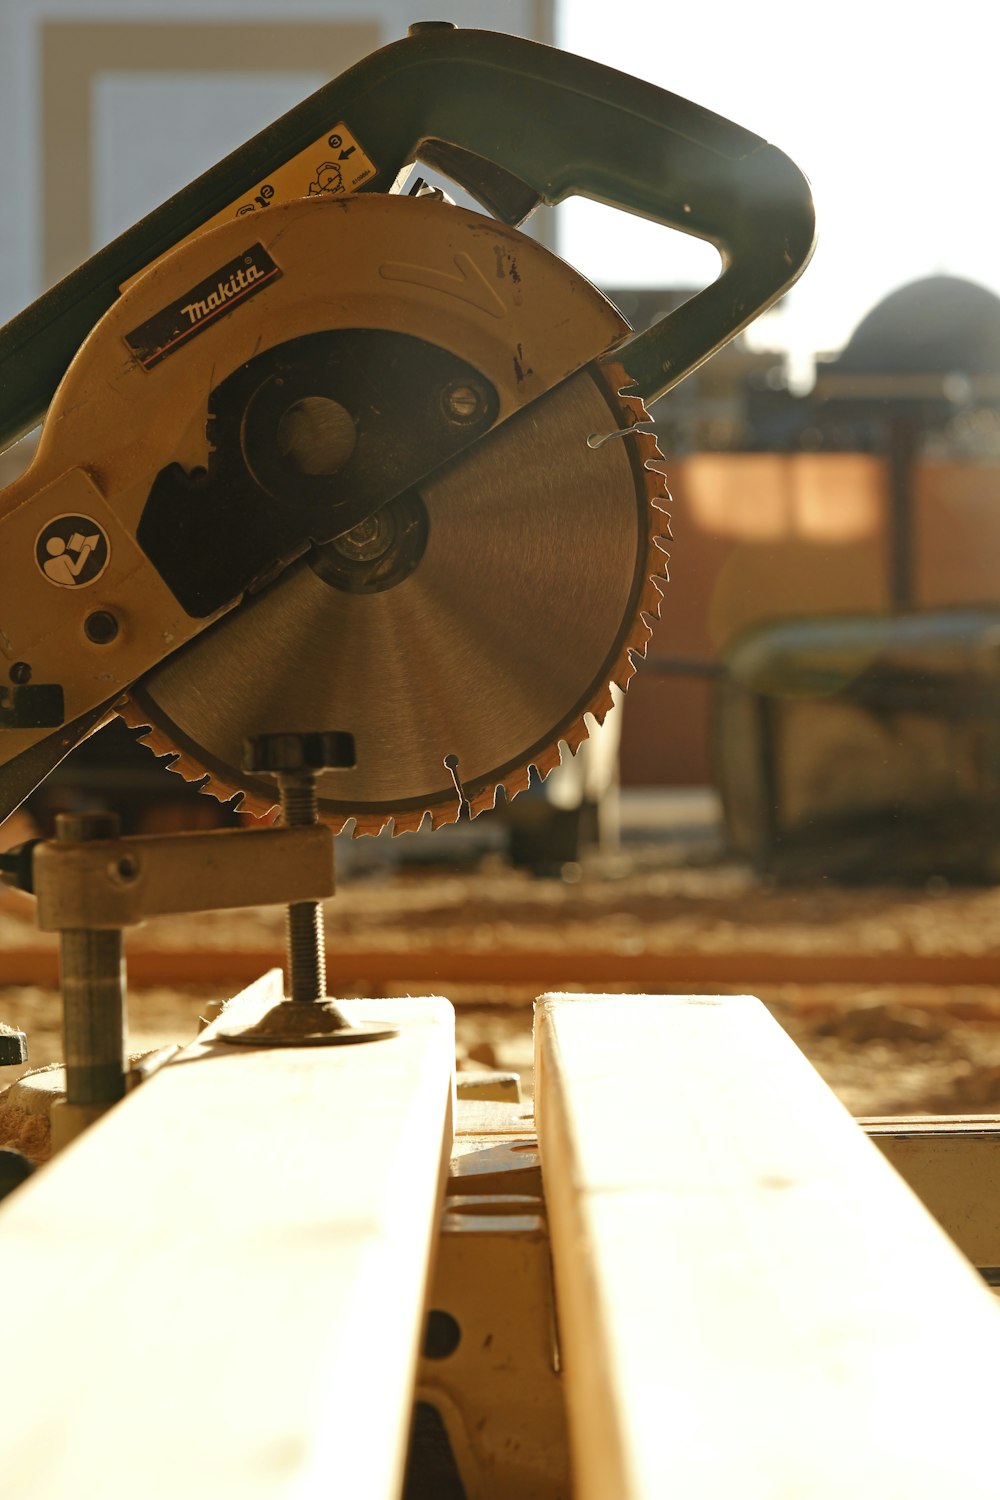 a circular saw is sitting on top of a bench